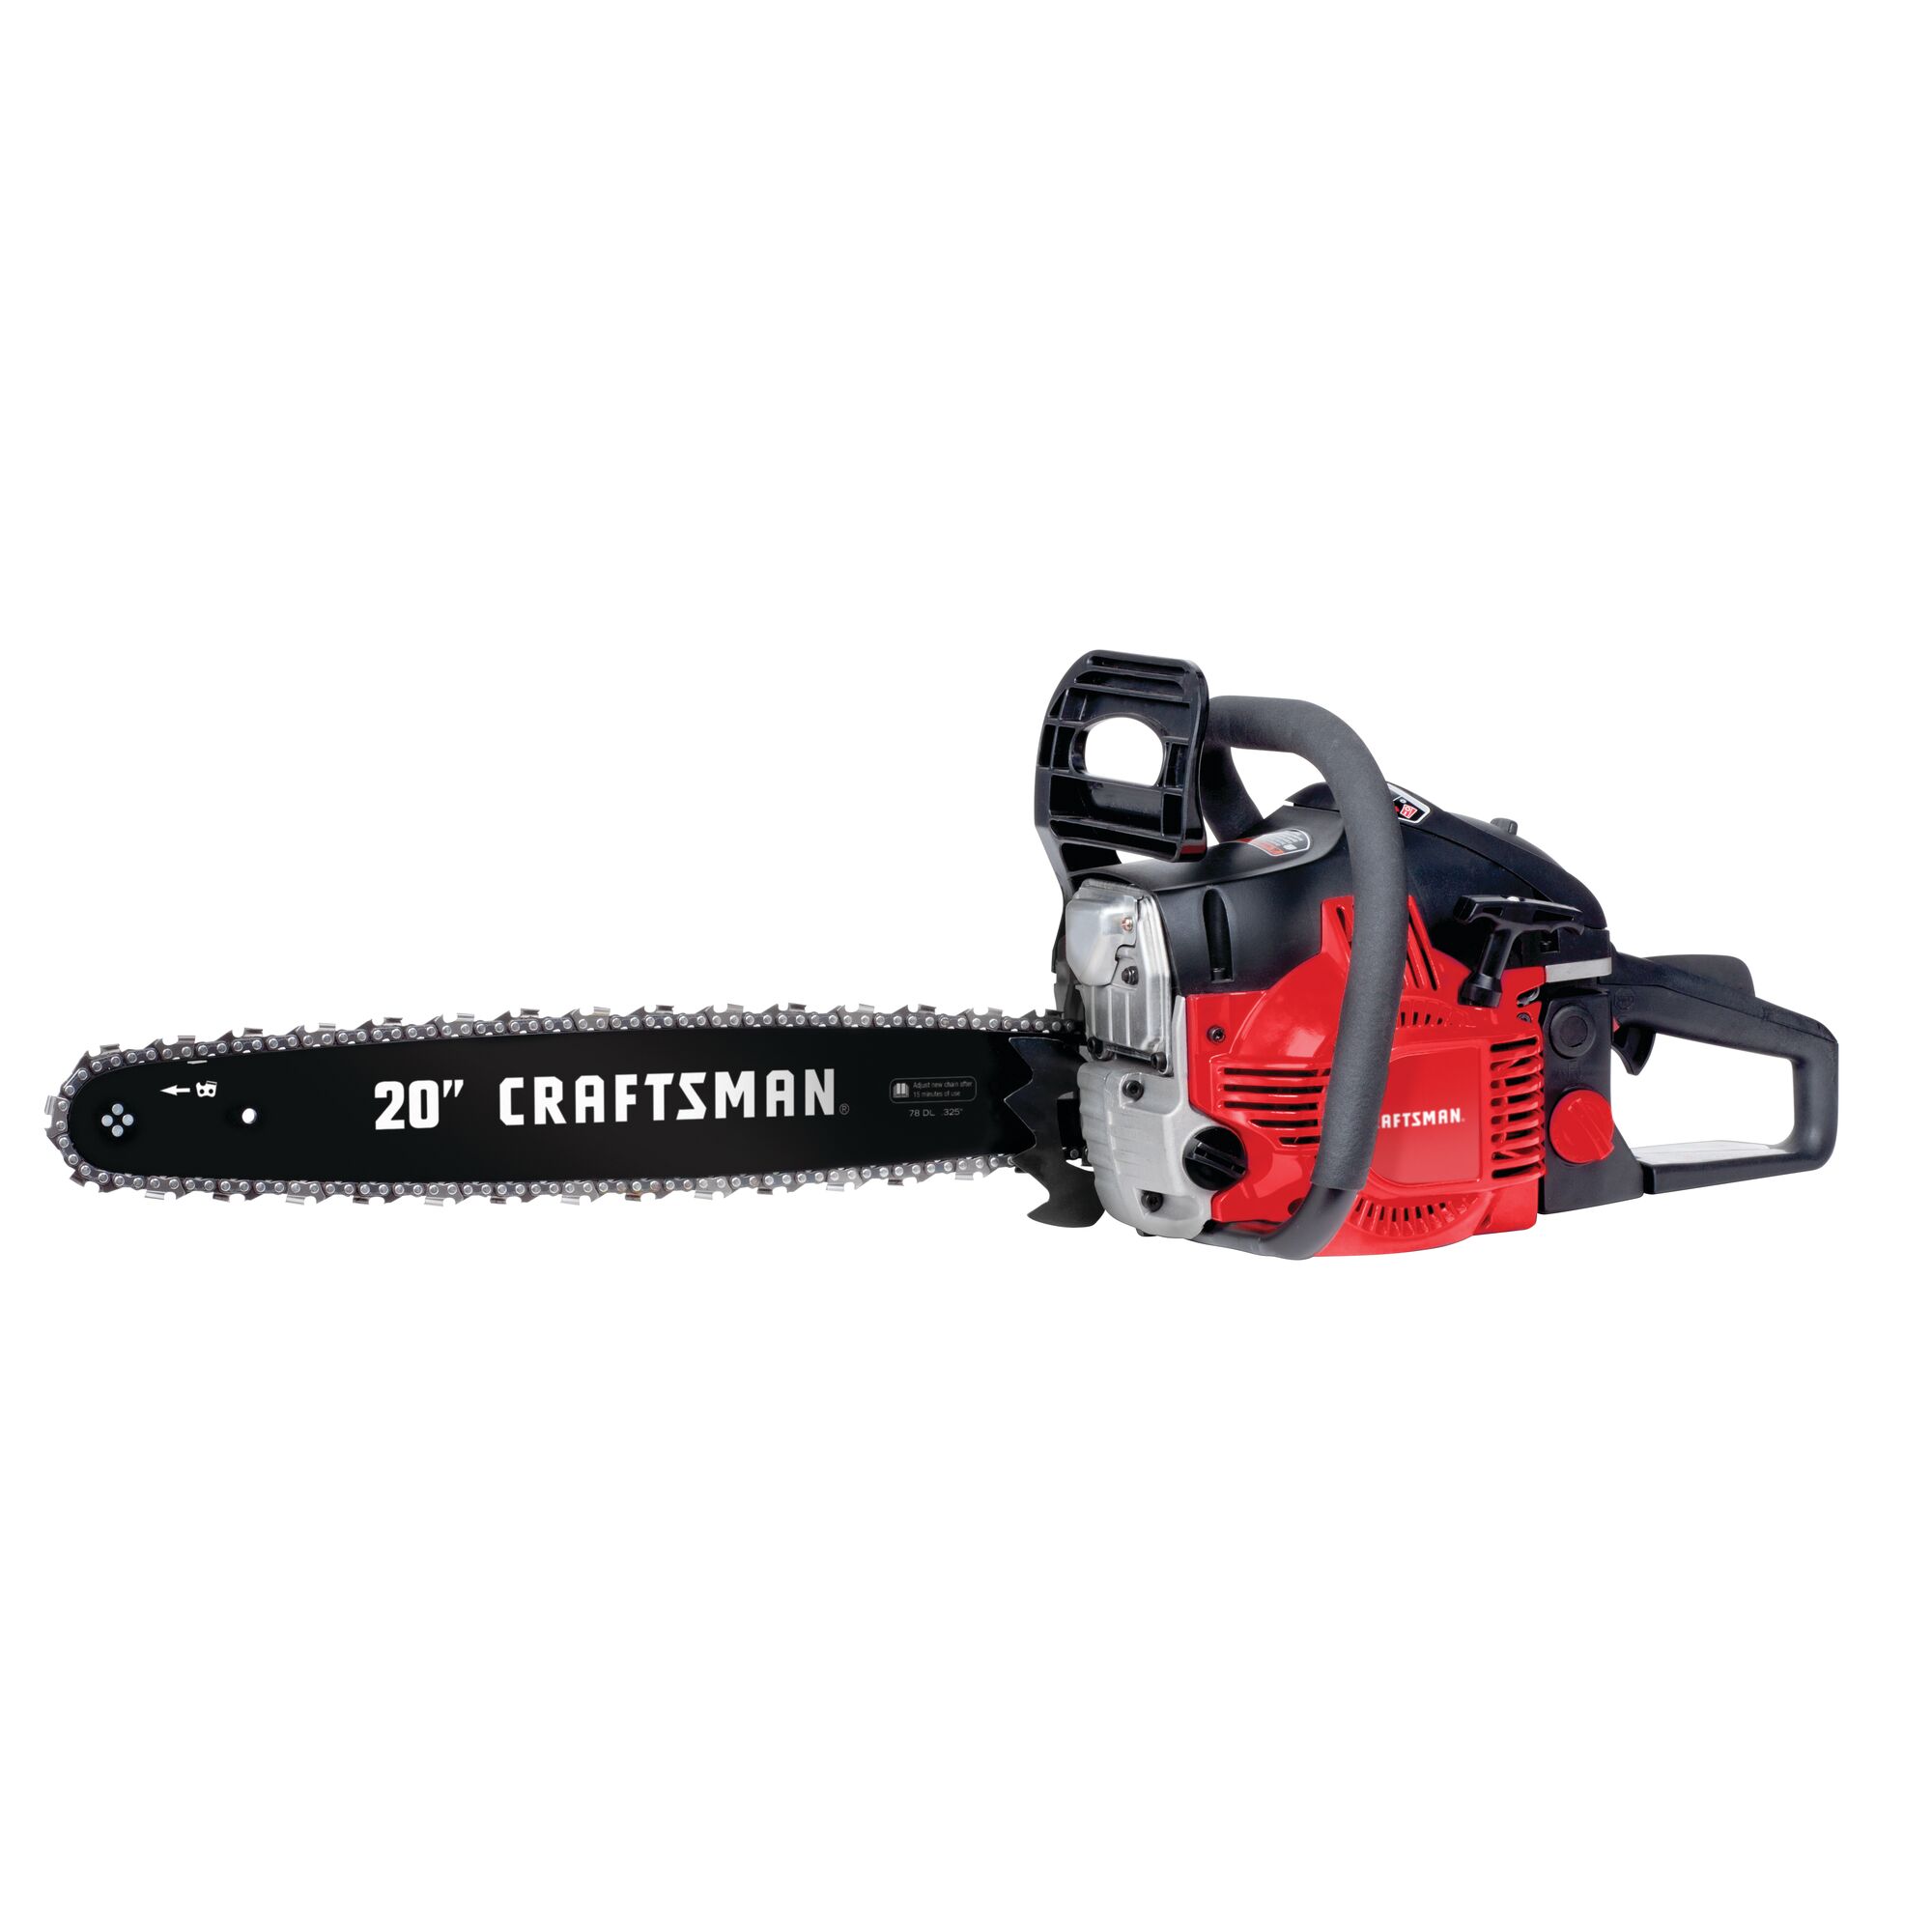 Profile of 20 inch 2 Cycle chainsaw.